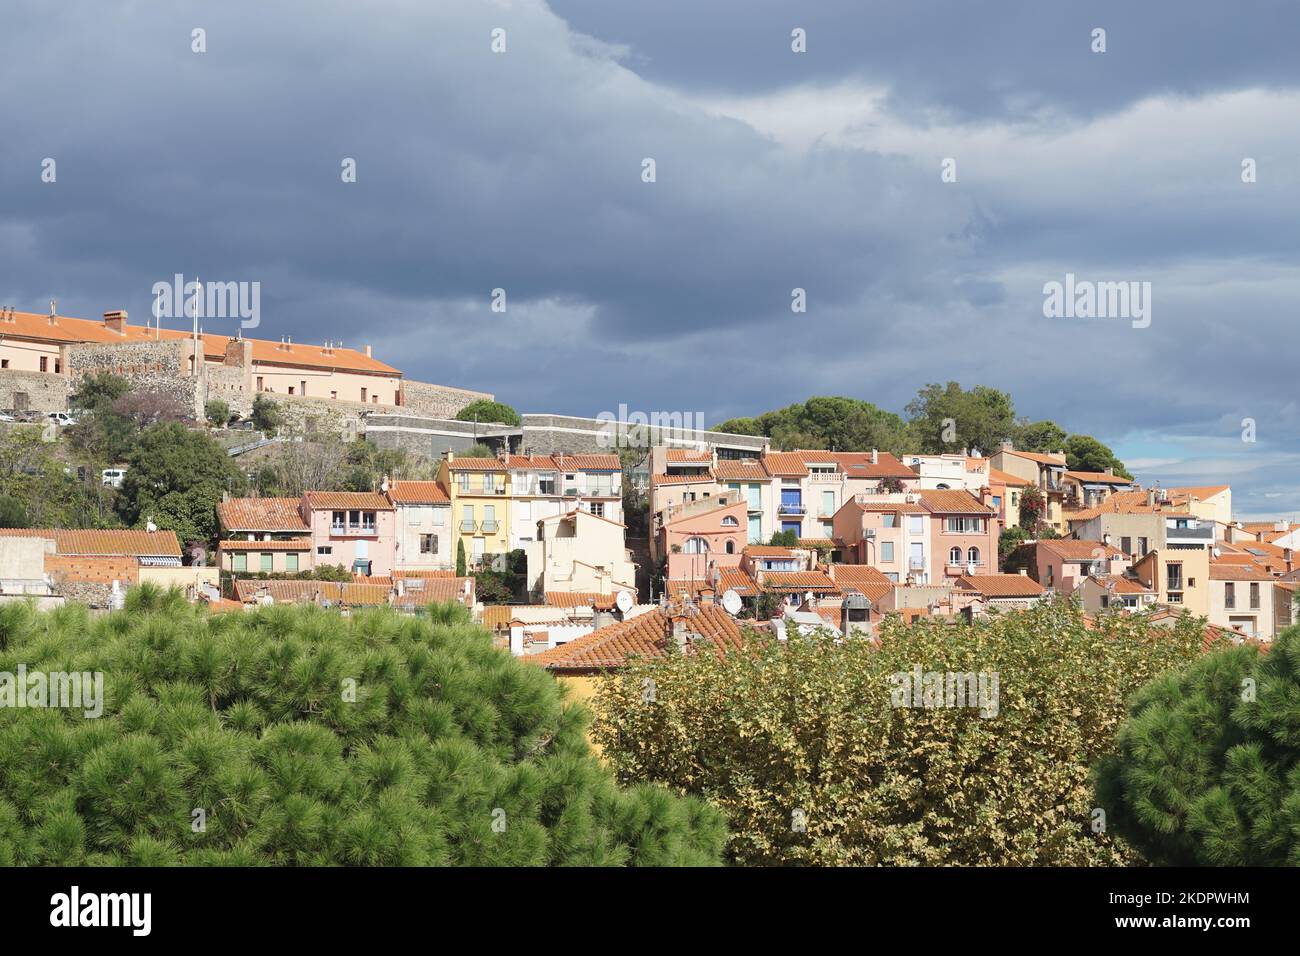 View of houses in Collioure, France against backdrop of overcast skies Stock Photo